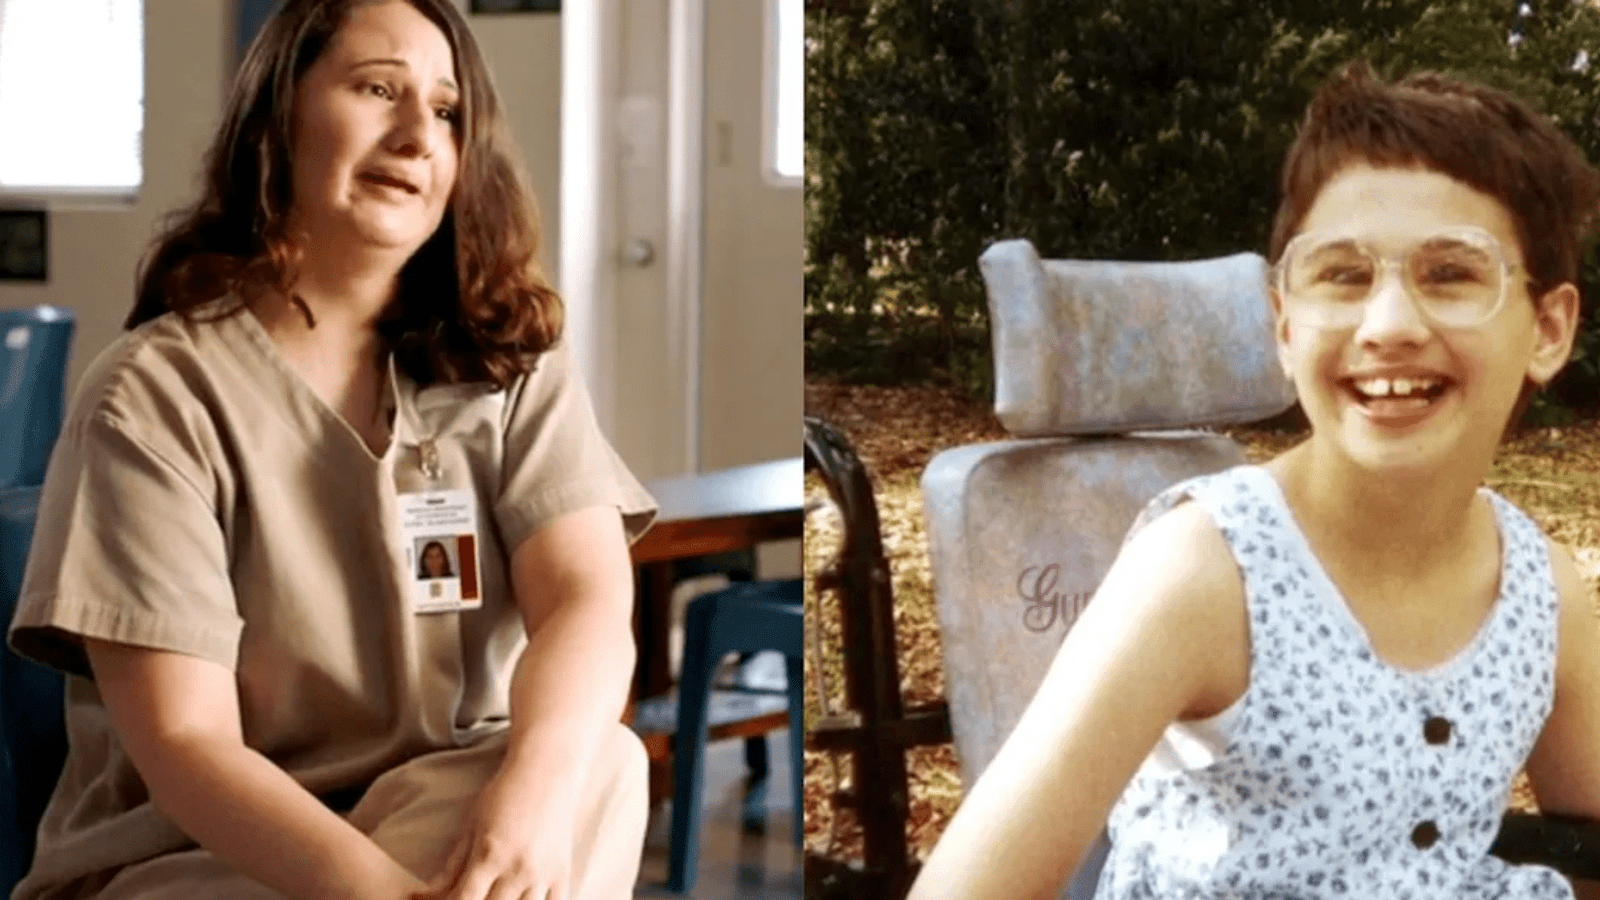 Gypsy Rose Blanchard Biography, Childhood, Career, Net Worth, BoyFriend, Physical Appearance & Much More